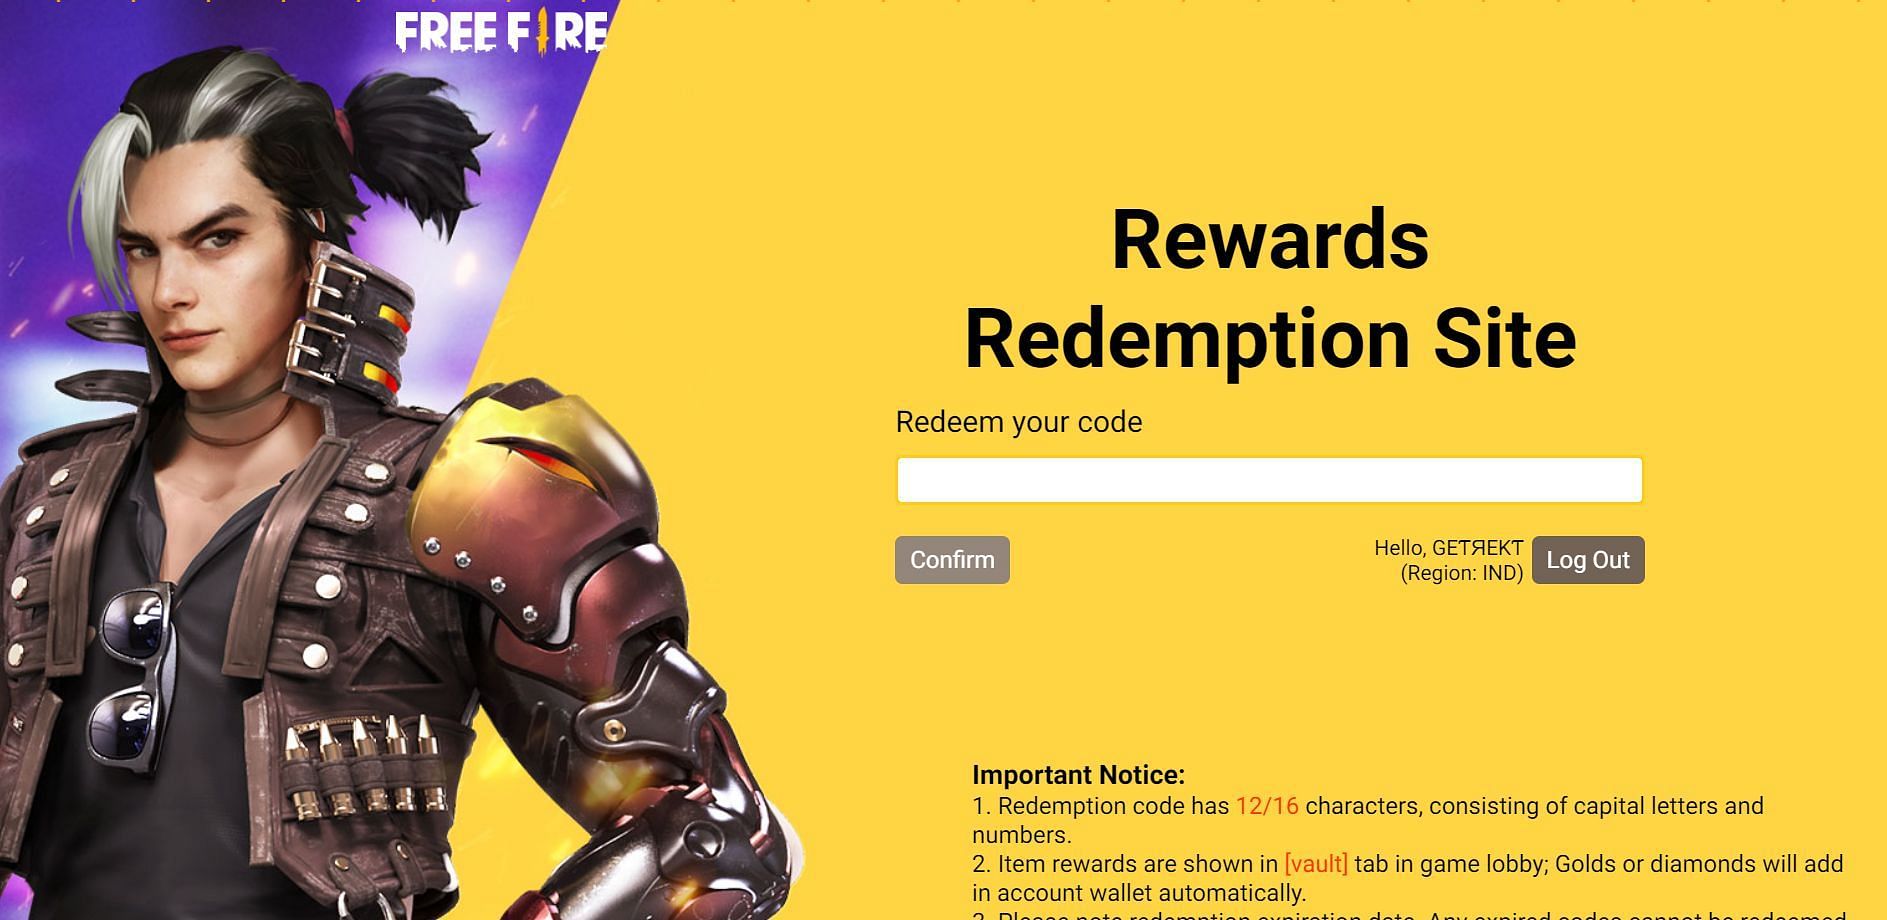 Players can enter the Free Fire MAX redemption code and press the & # 039 button;  Confirm & # 039;  (Image via Garena)